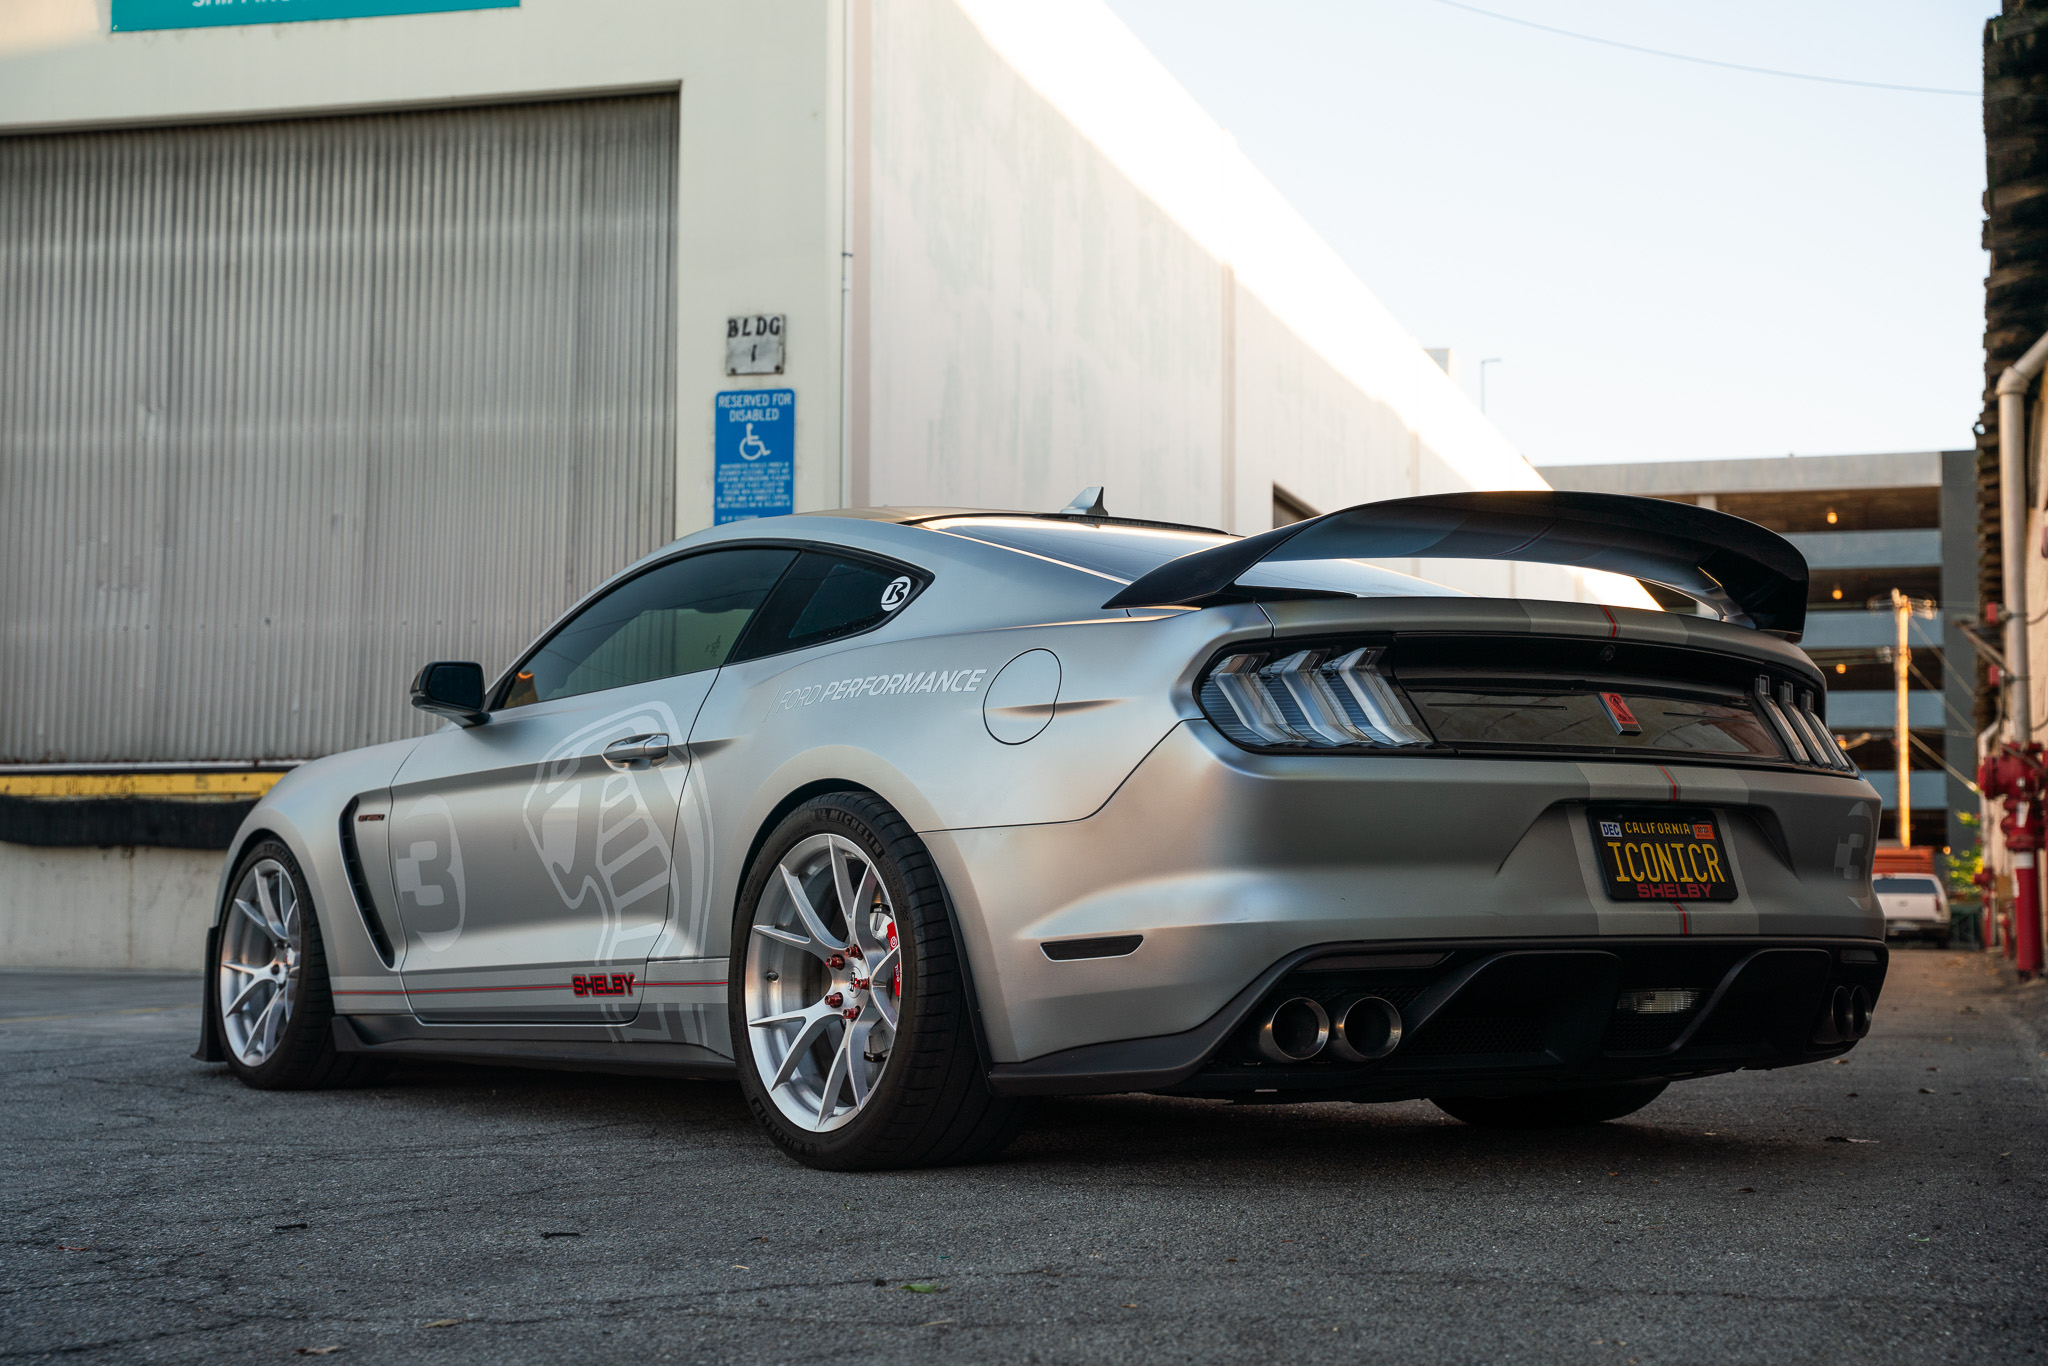 S650 Mustang 2024 Mustang Wheels Offsets & Fitment (same as S550)? DSC00986